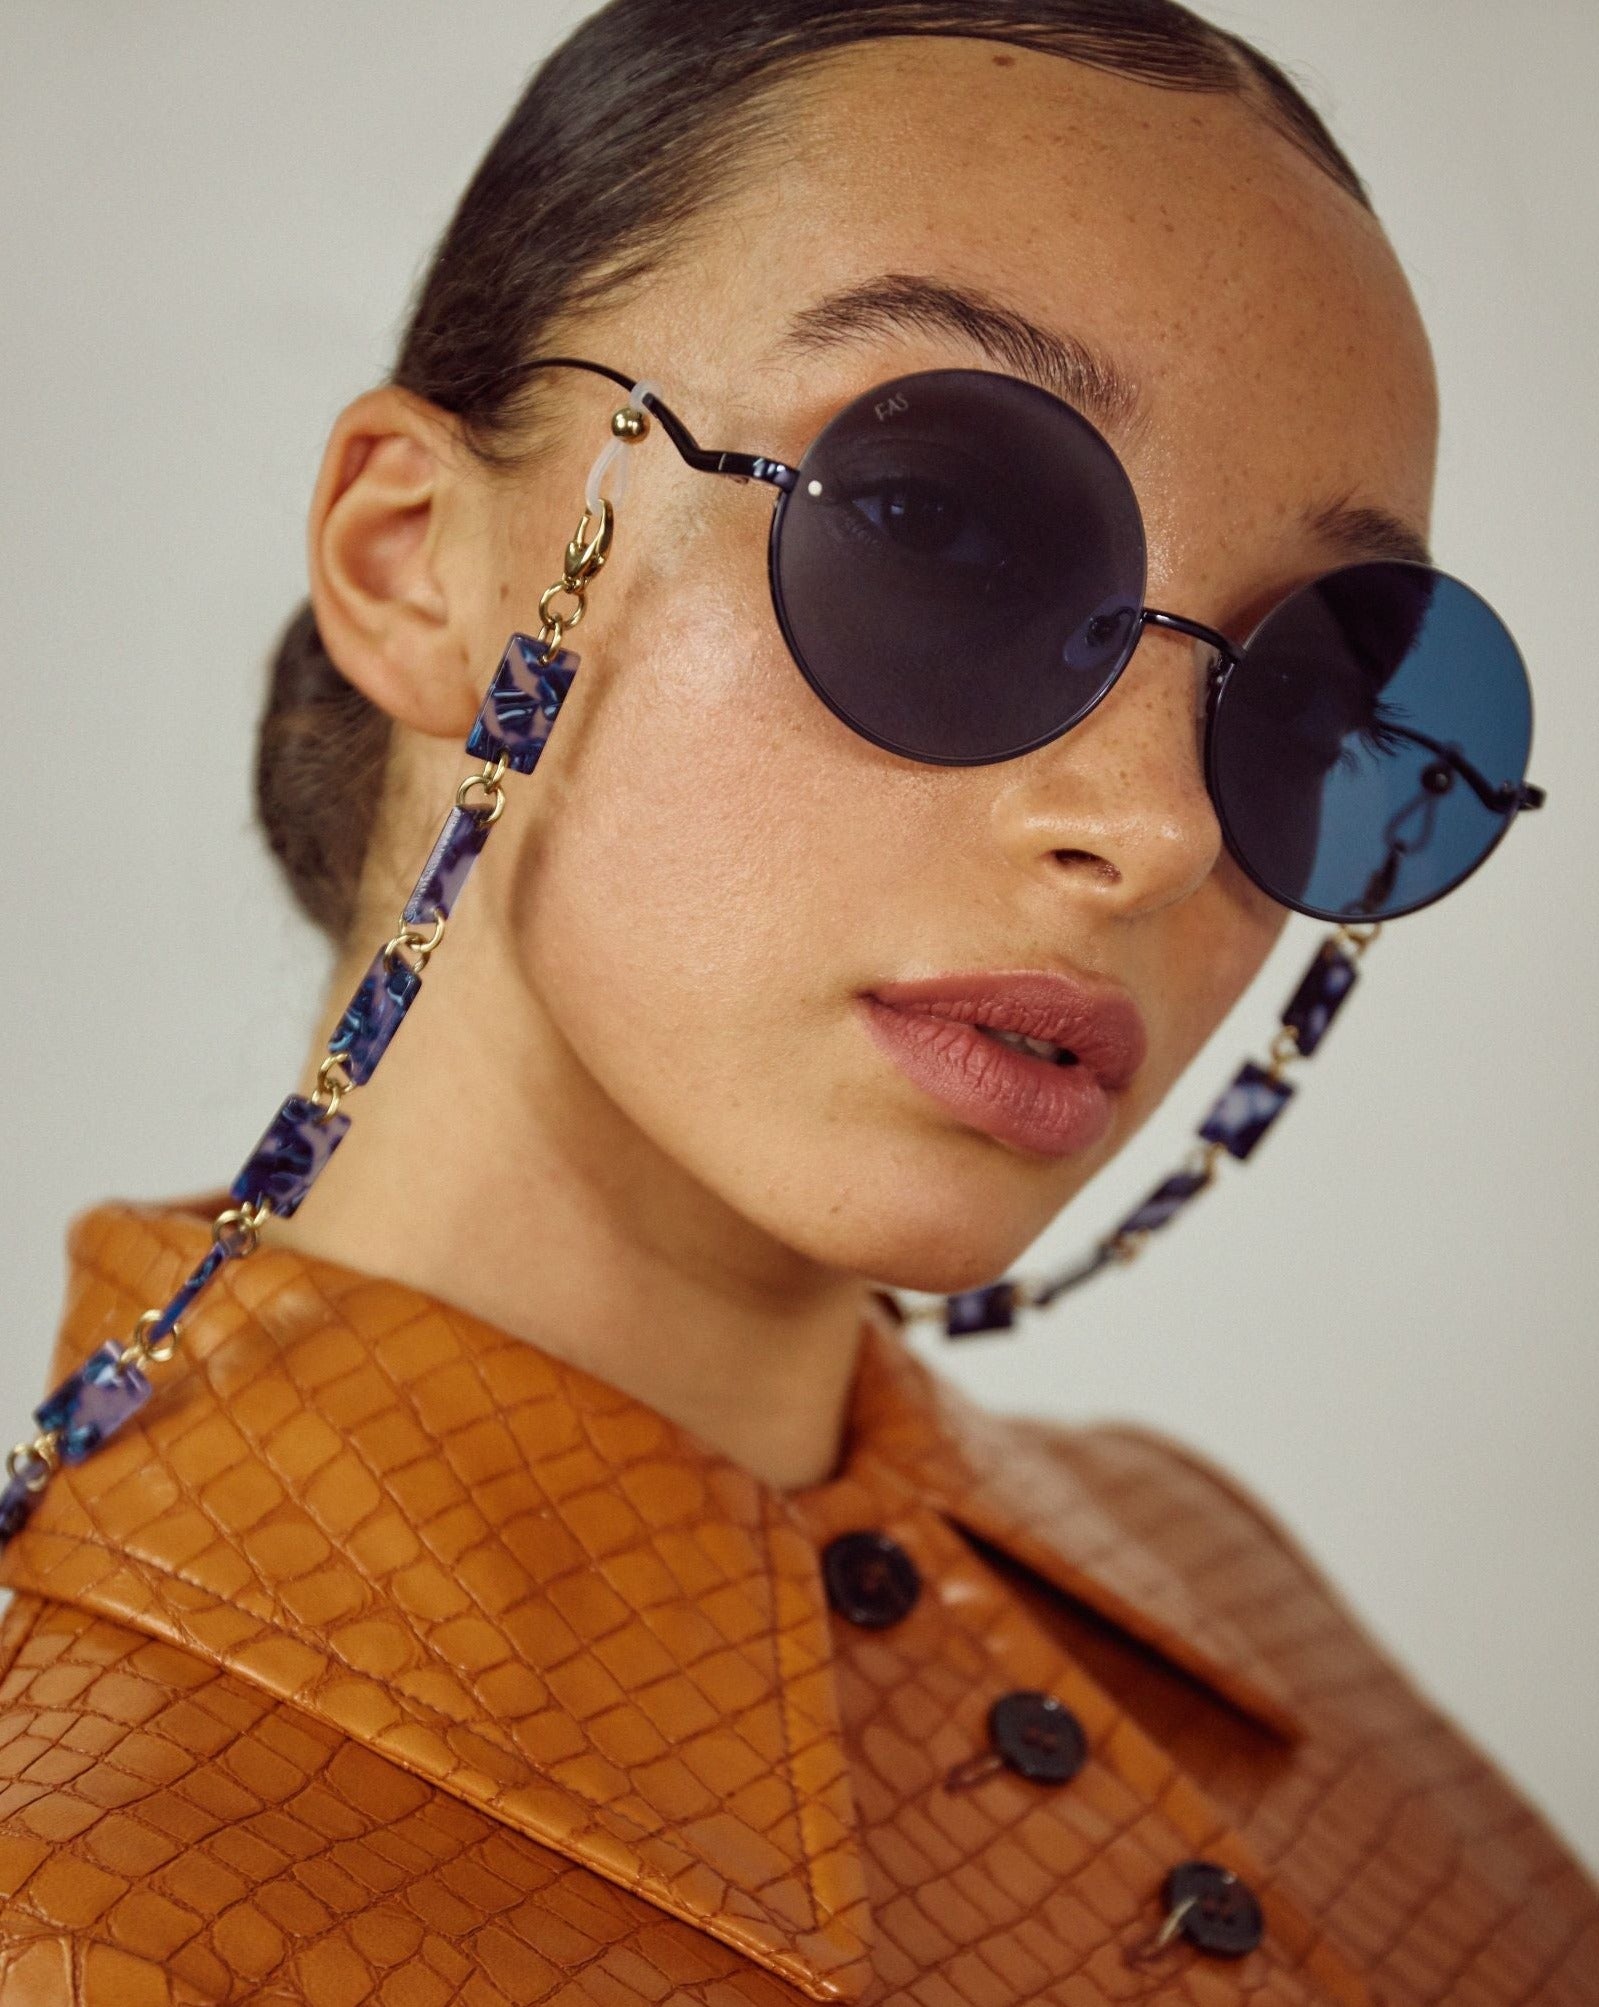 A person with slicked-back hair is wearing round, dark sunglasses with stainless steel frames and a decorative chain. They are dressed in a brown, textured jacket with a buttoned front. The background is plain and off-white. The sunglasses they are wearing are the Oceana by For Art&#39;s Sake®.